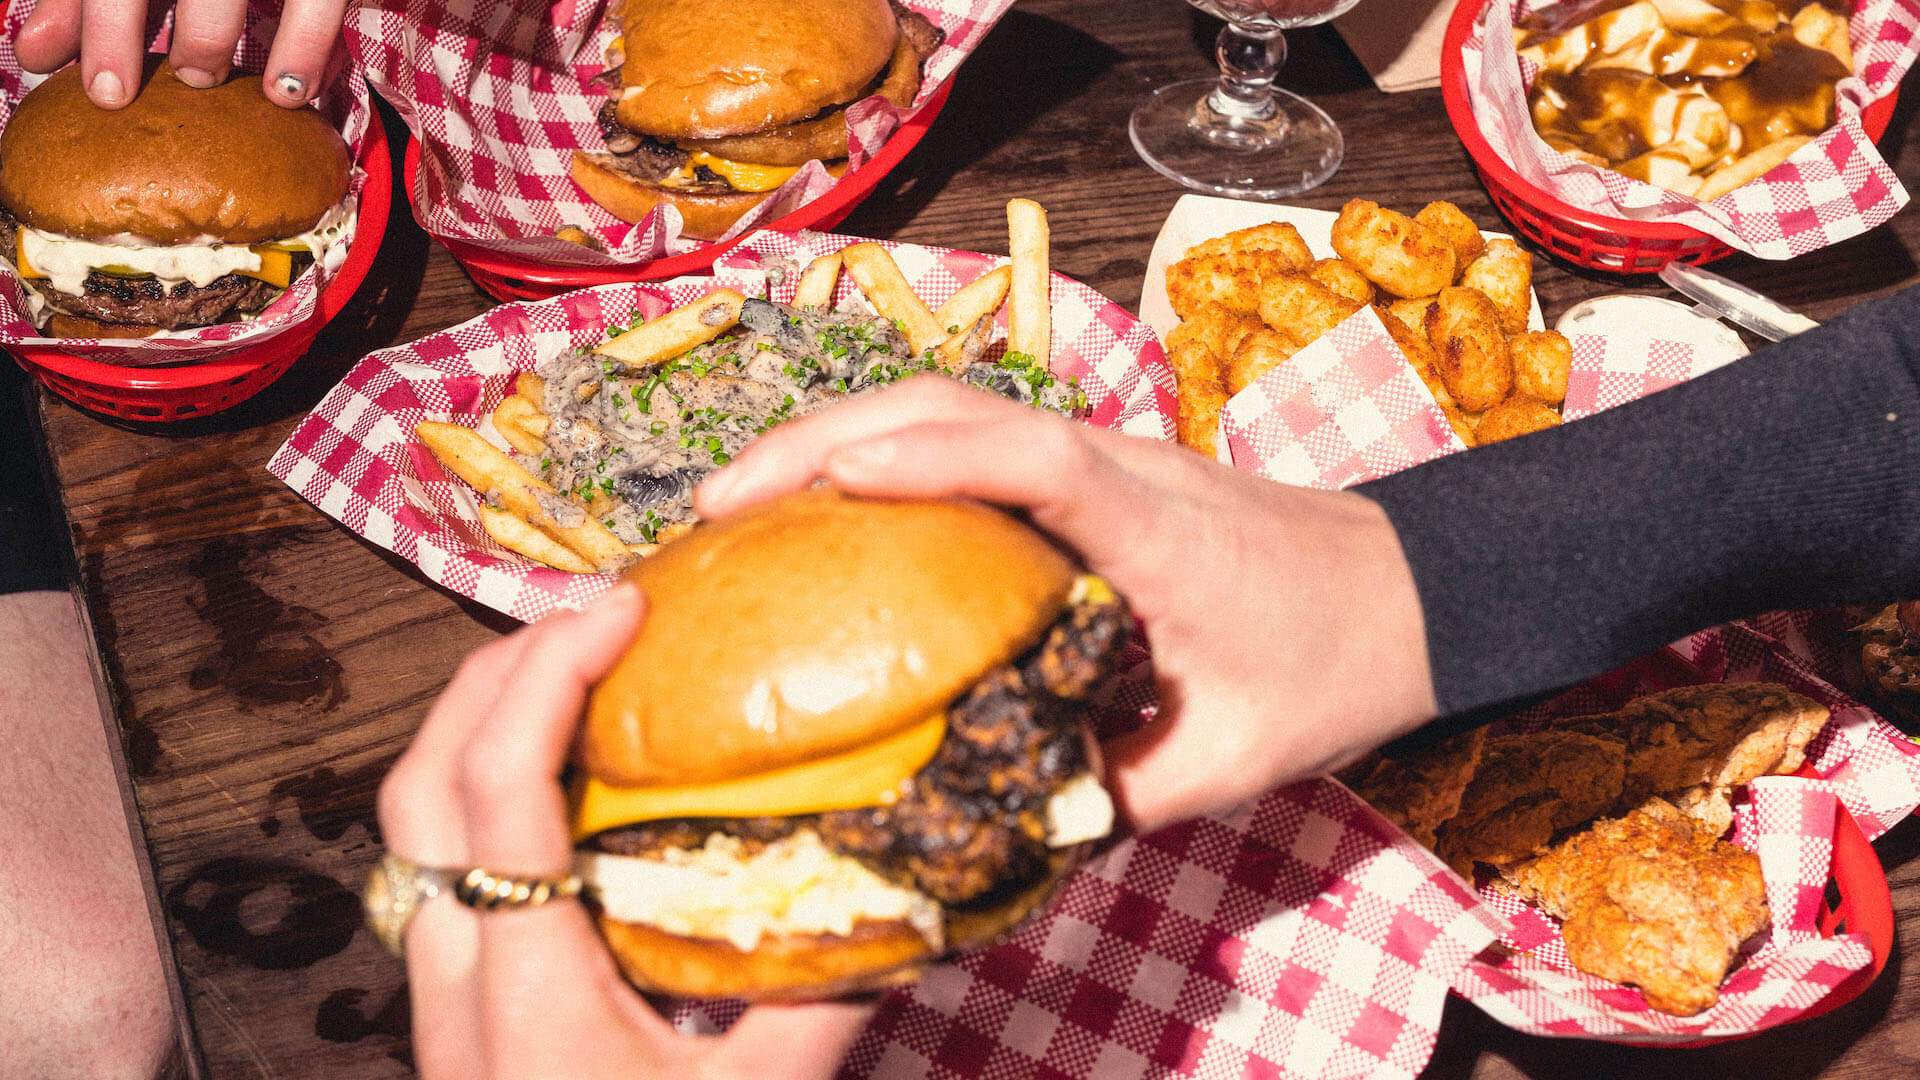 Where to Find the Best Burgers in Melbourne